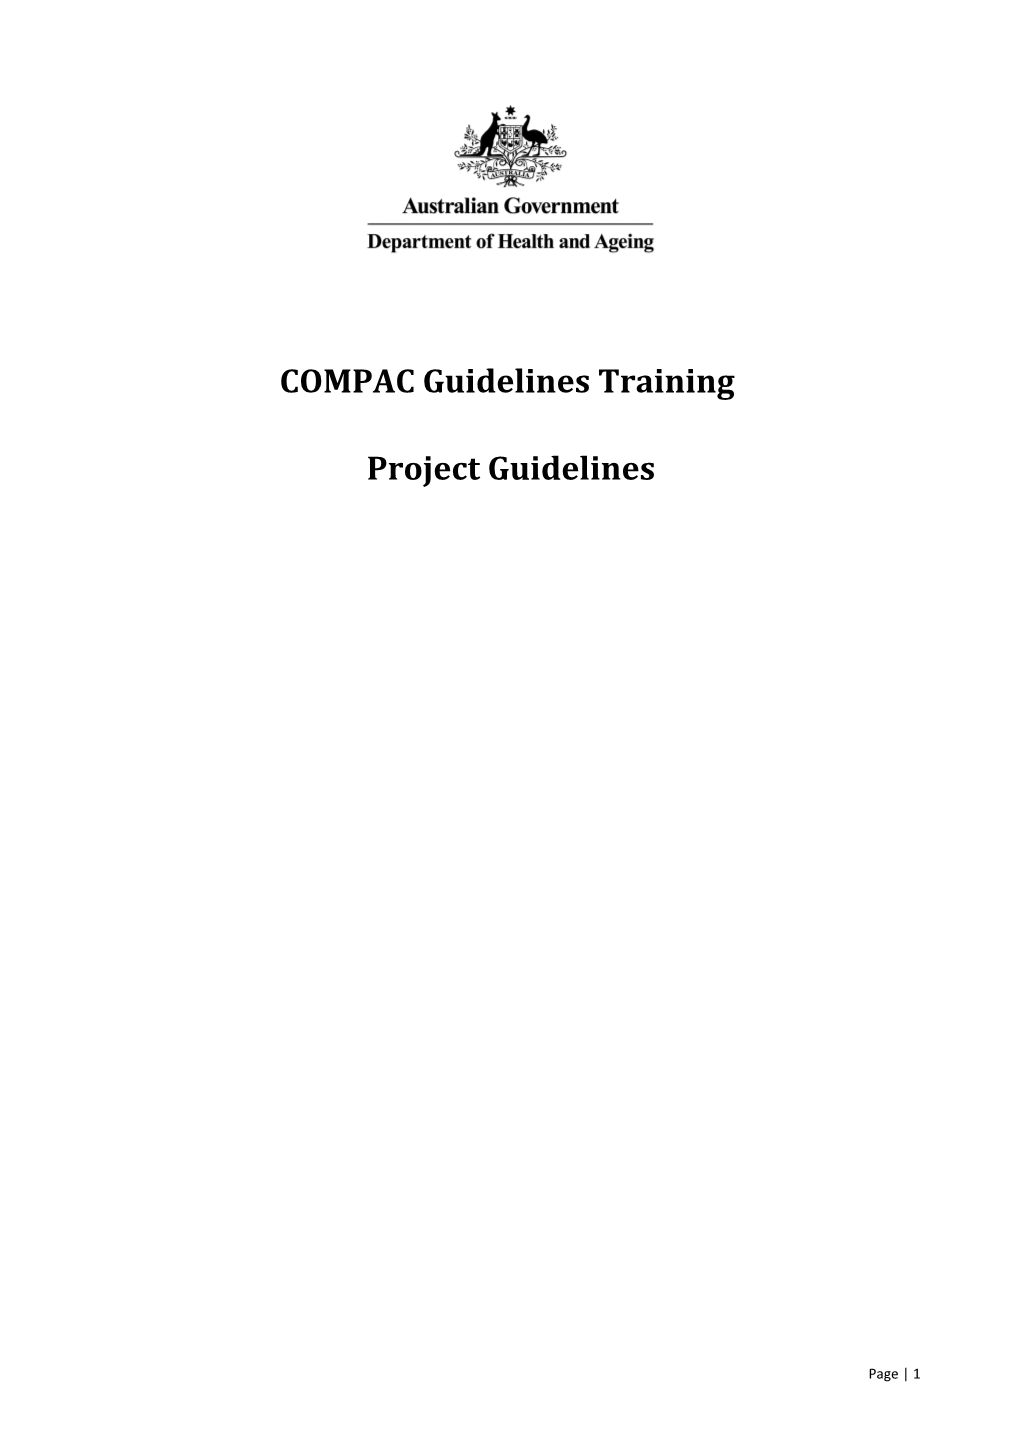 COMPAC Guidelines Training